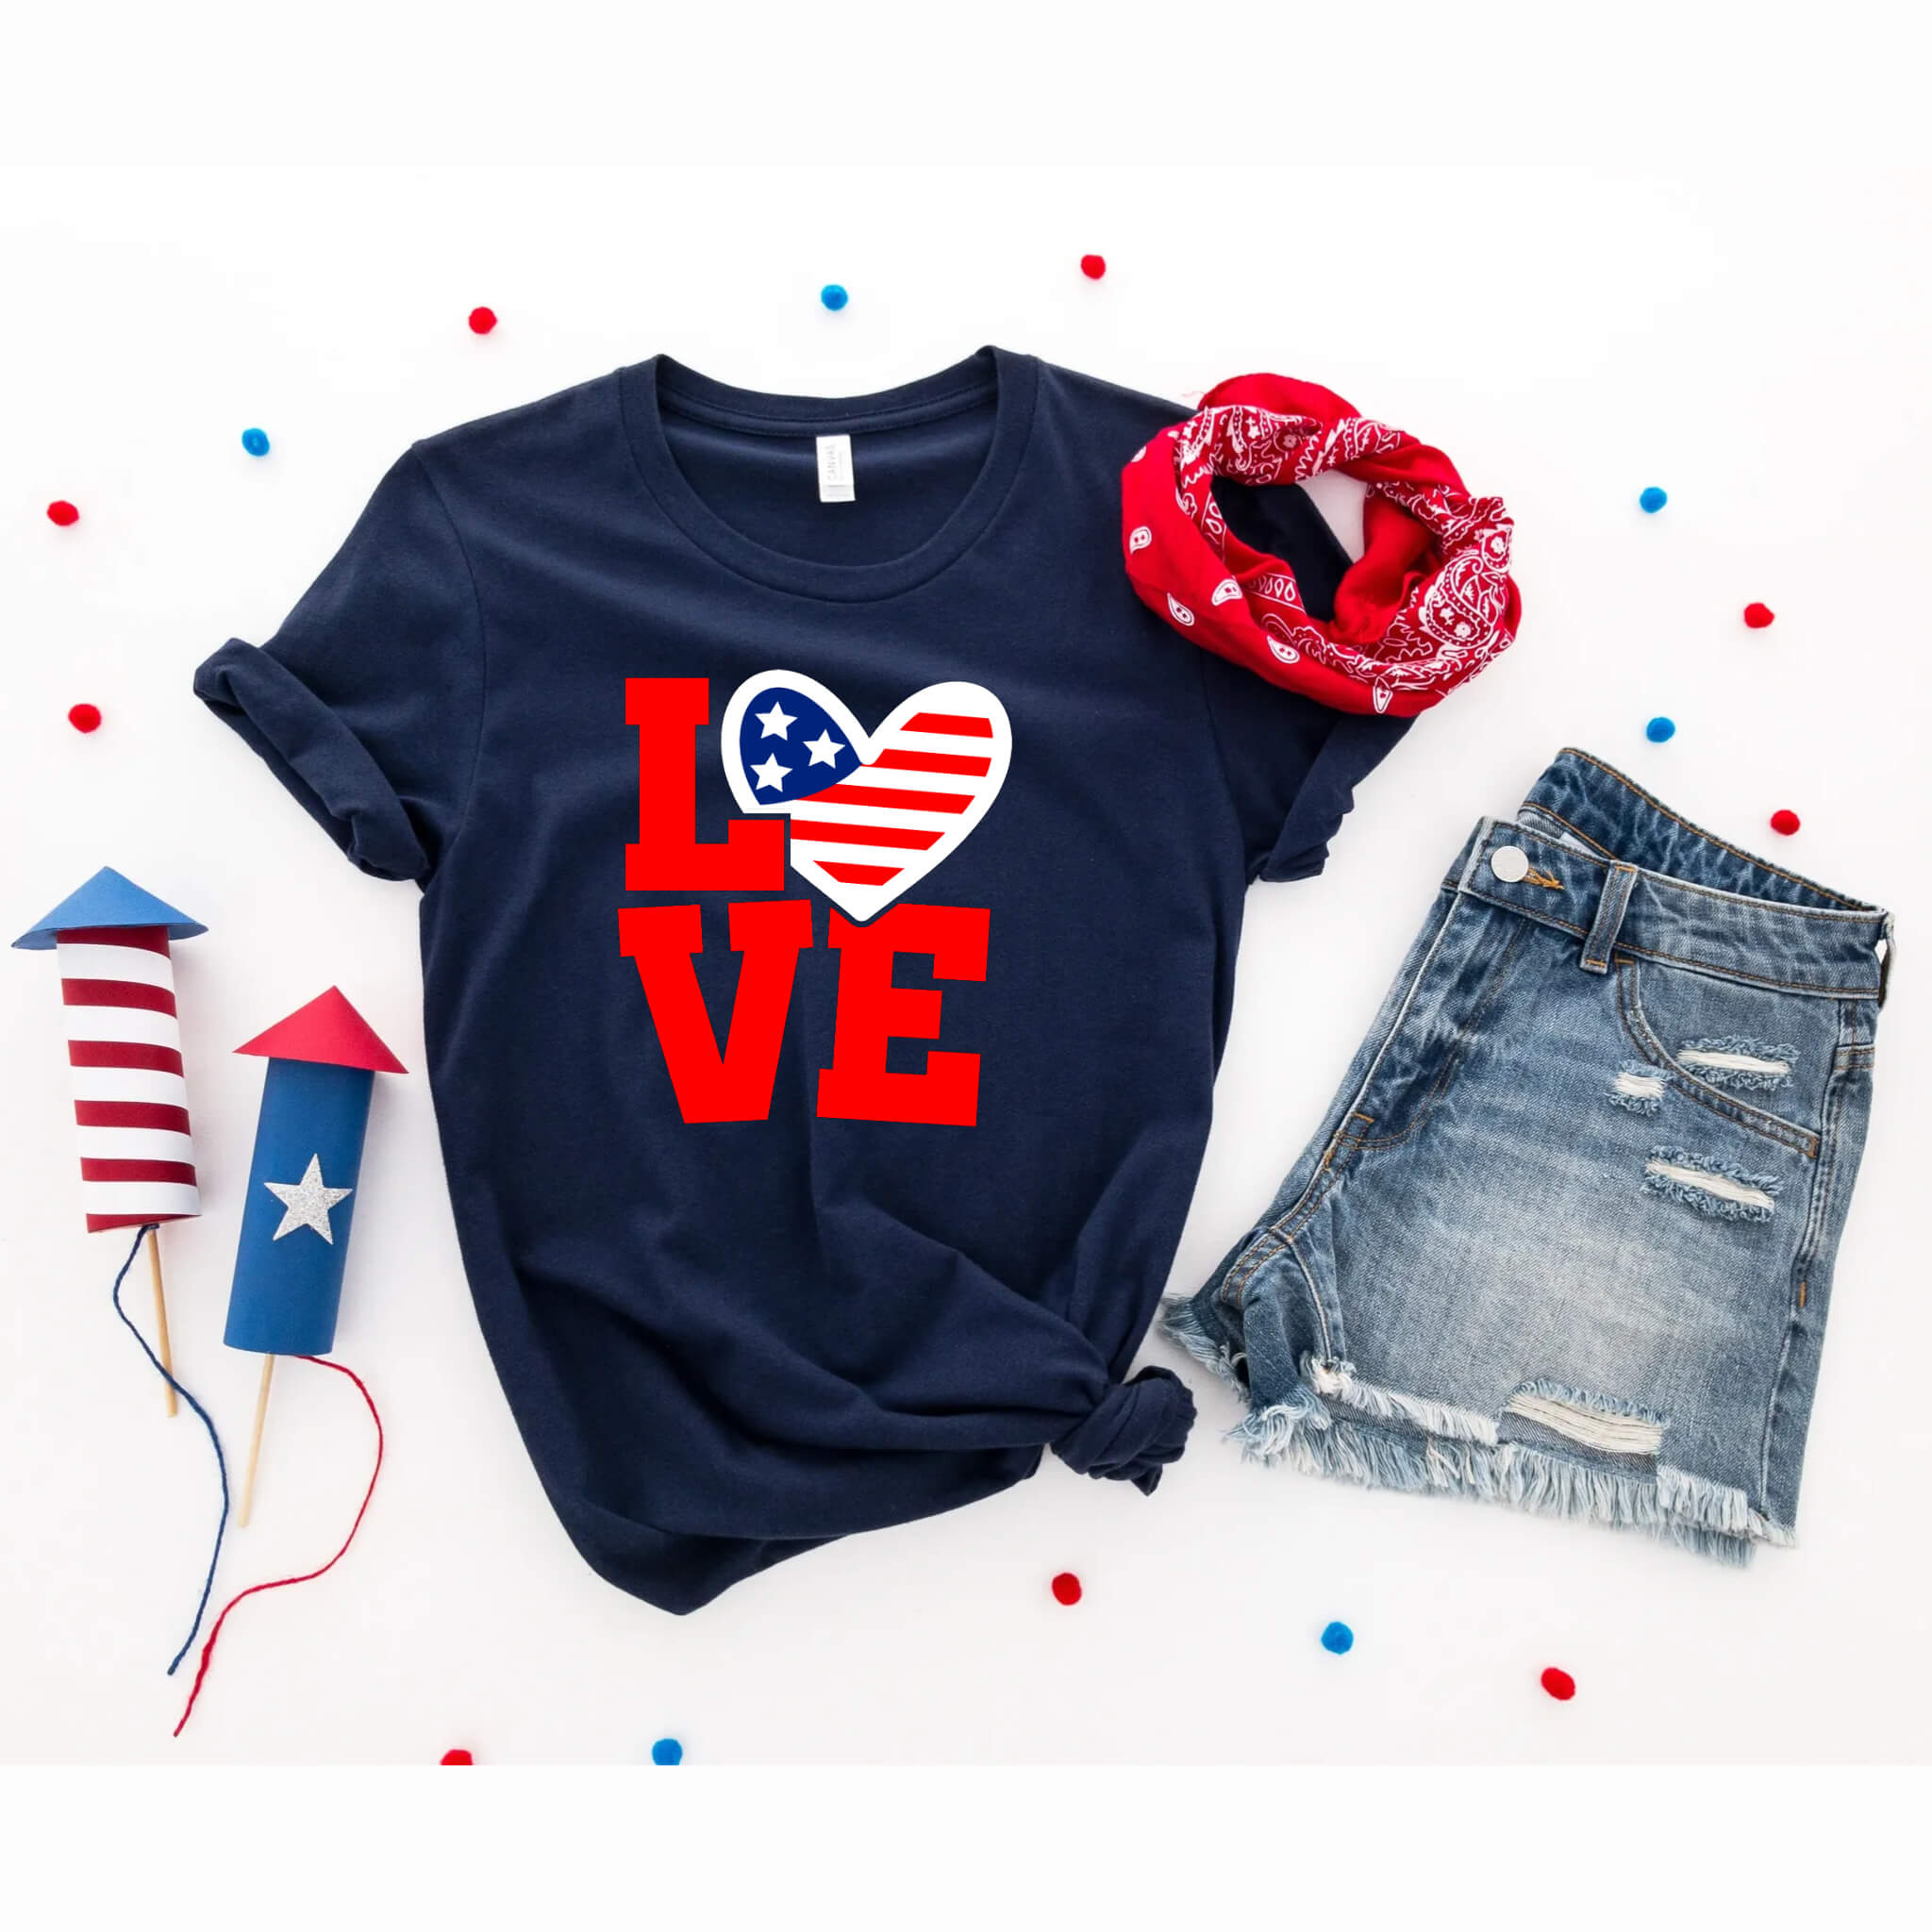 4th of July - For The Love Of America Patriotic Graphic Print Women’s T-Shirt / Tank Top